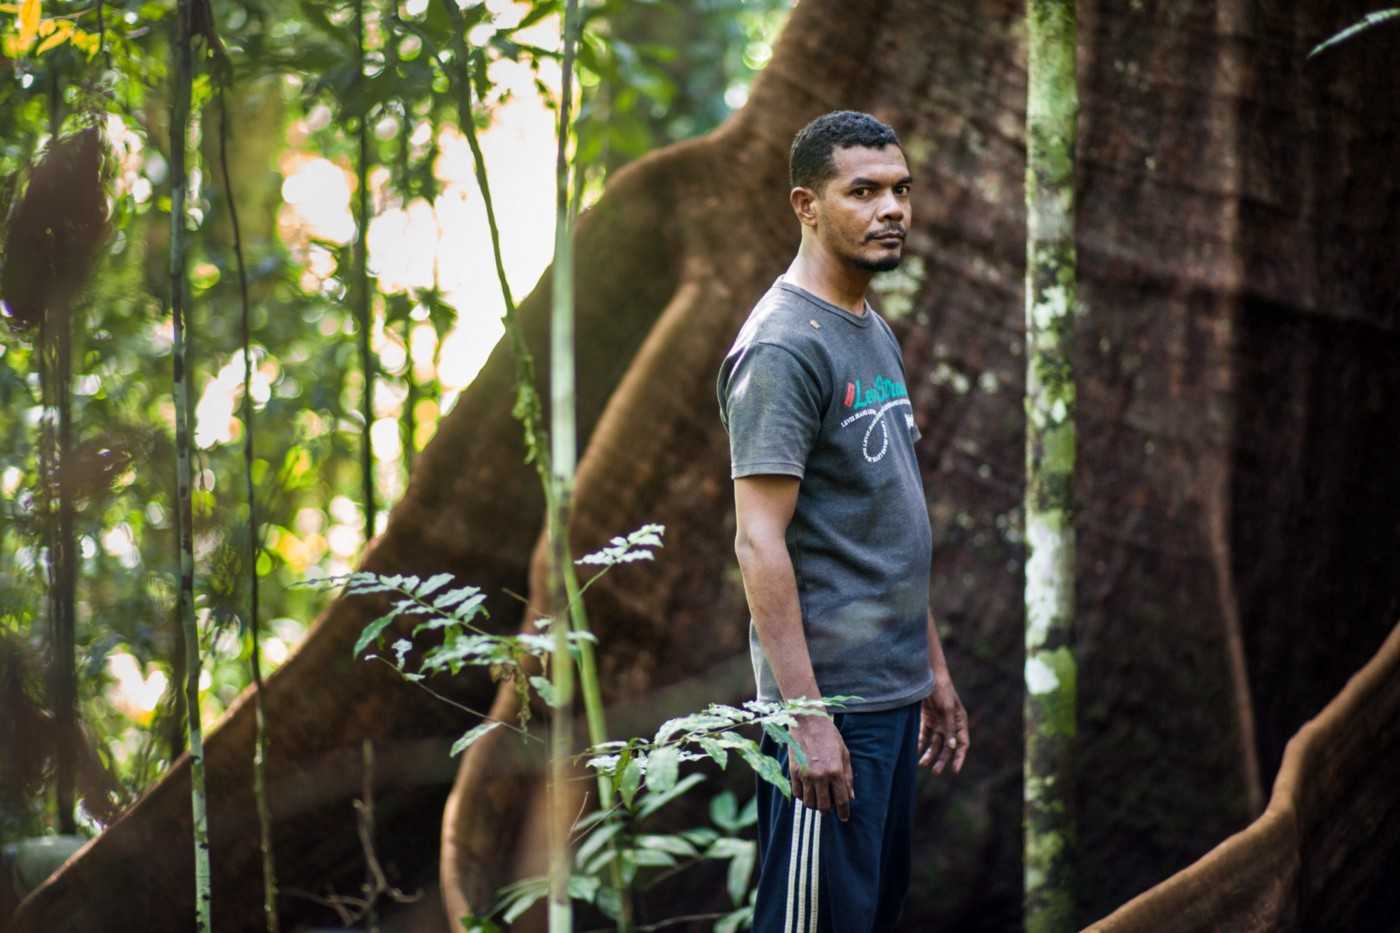 Mika Ganobal in the forest near his home village of Lorang, central Aru. By Leo Plunkett/The Gecko Project.